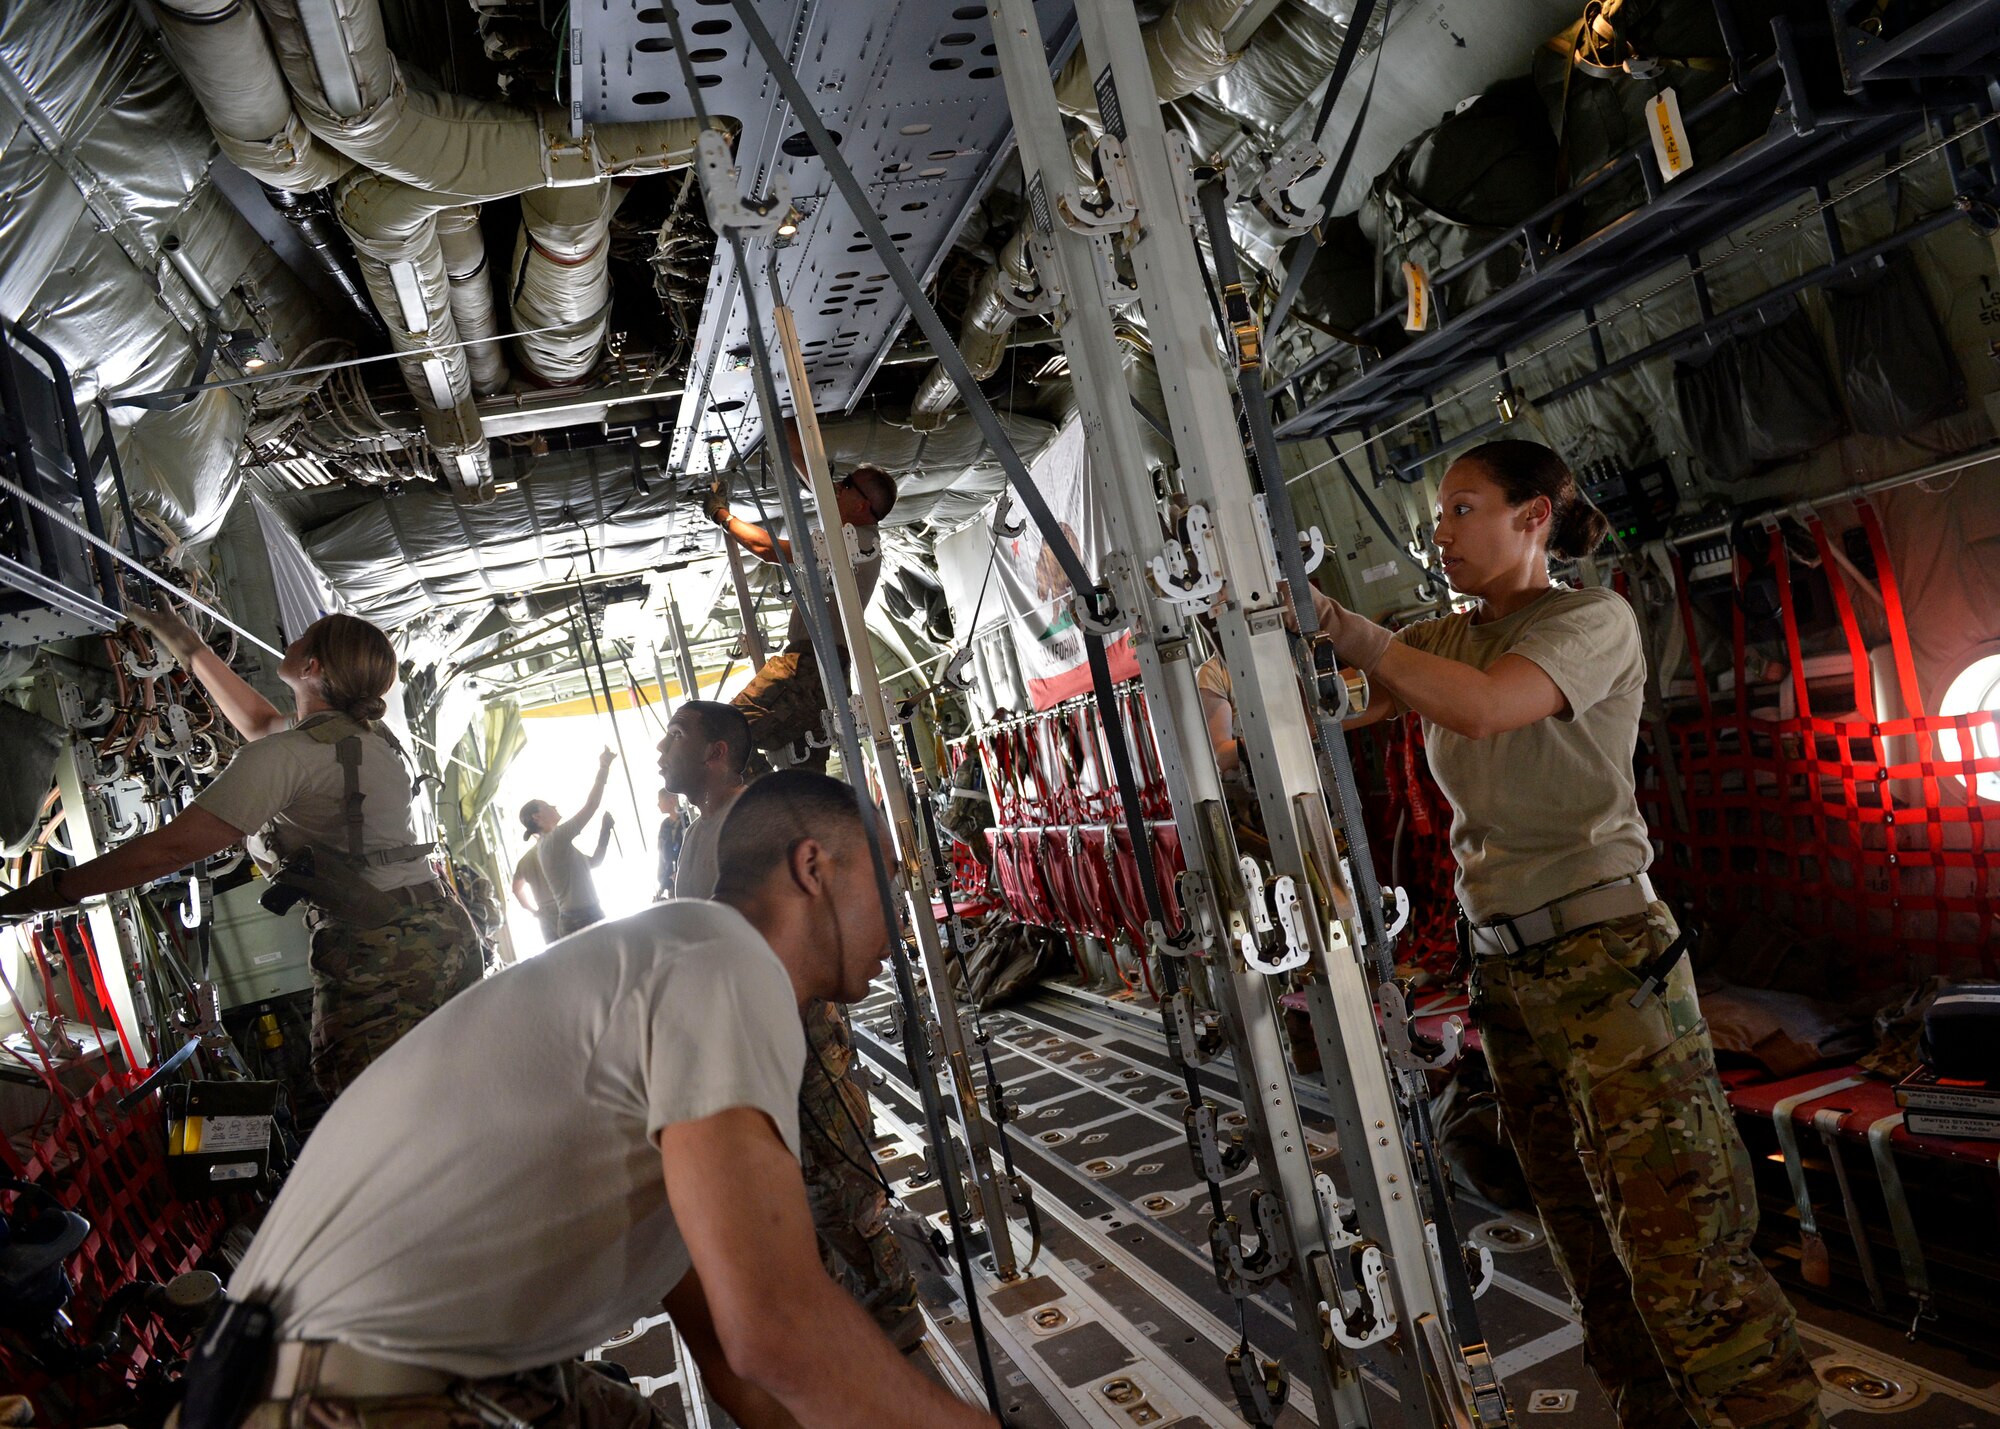 U.S. Air Force Airmen from the 455th Expeditionary Aeromedical Evacuation Squadron prepare a C-130J Super Herucules aircraft for patient transportation at Bagram Airfield, Afghanistan May 29, 2014.  The Aeromedical Evacuation squadron moves injured and sick patients around Afghanistan to a higher level of care. (U.S. Air Force photo by Staff Sgt. Evelyn Chavez/Released)